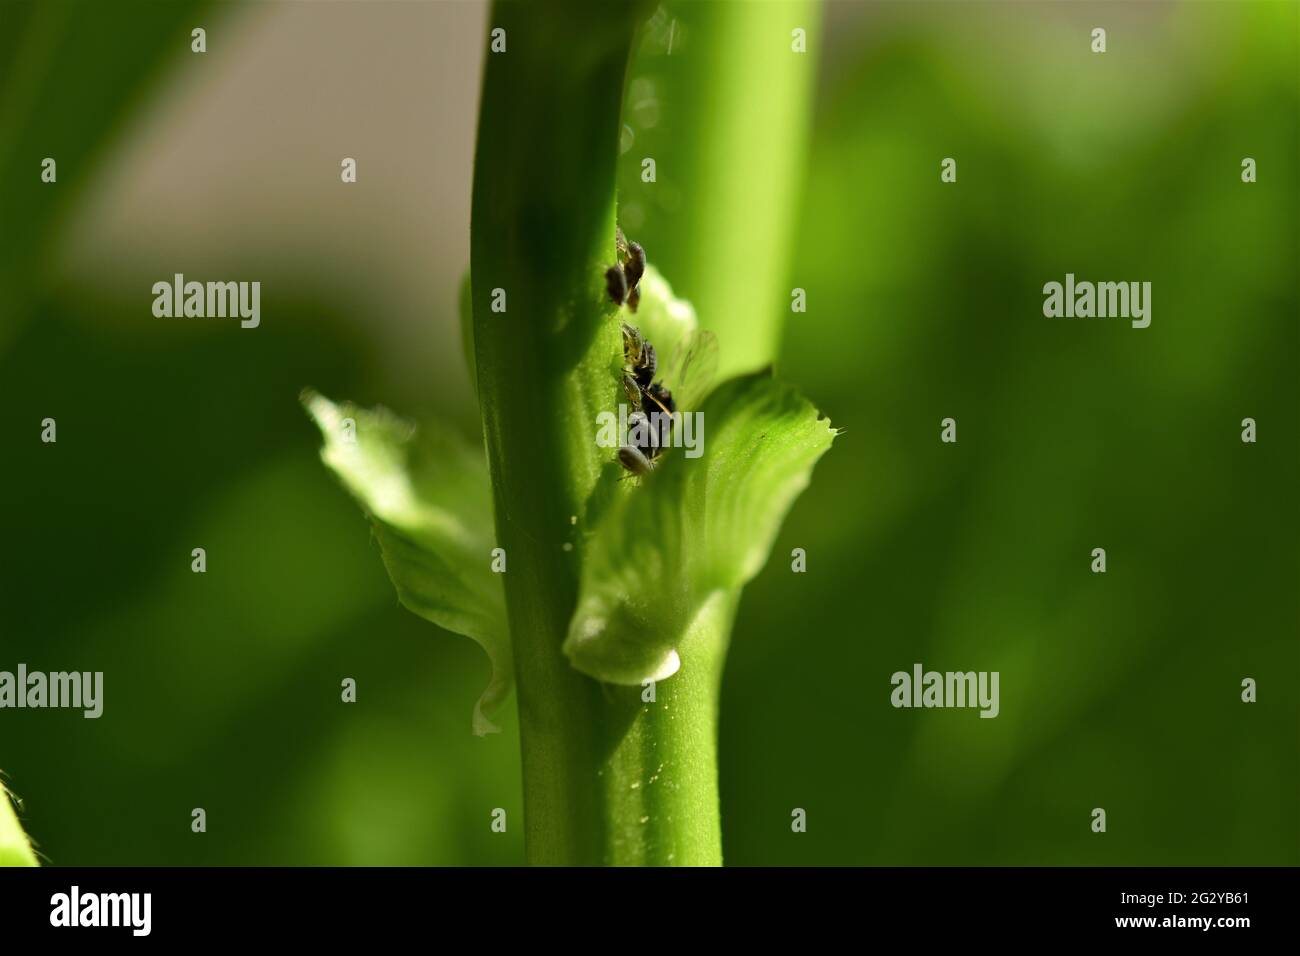 Black aphids on a flower stalk as a close up Stock Photo